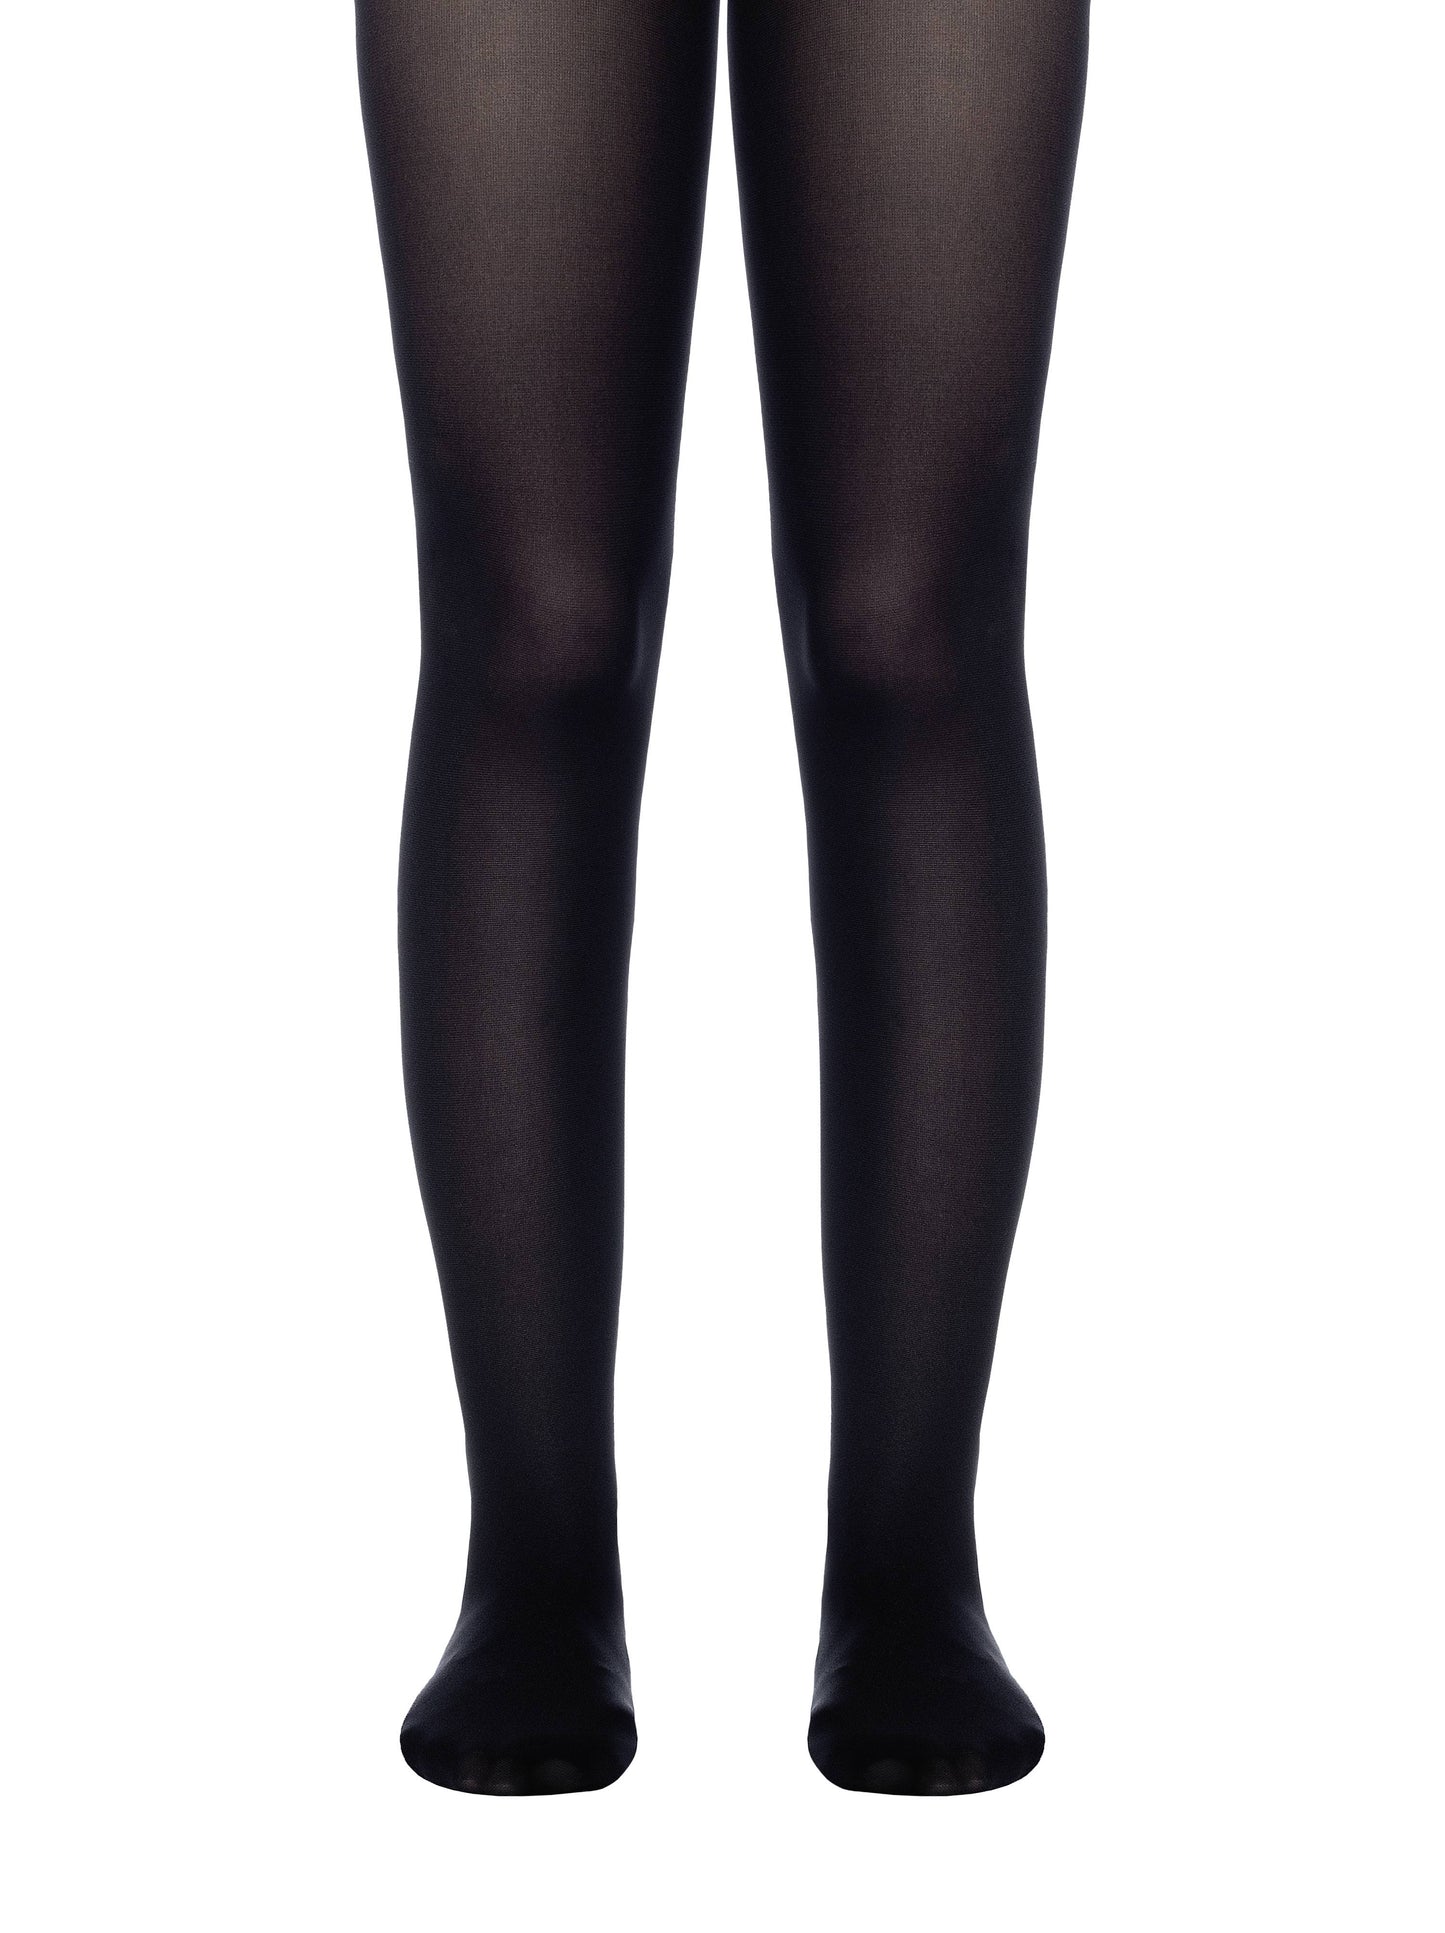 Conte Only 40 Den - Classic Semi-Opaque Tights For Girls/Teens - 10yr. 12yr. (12С-18СП)